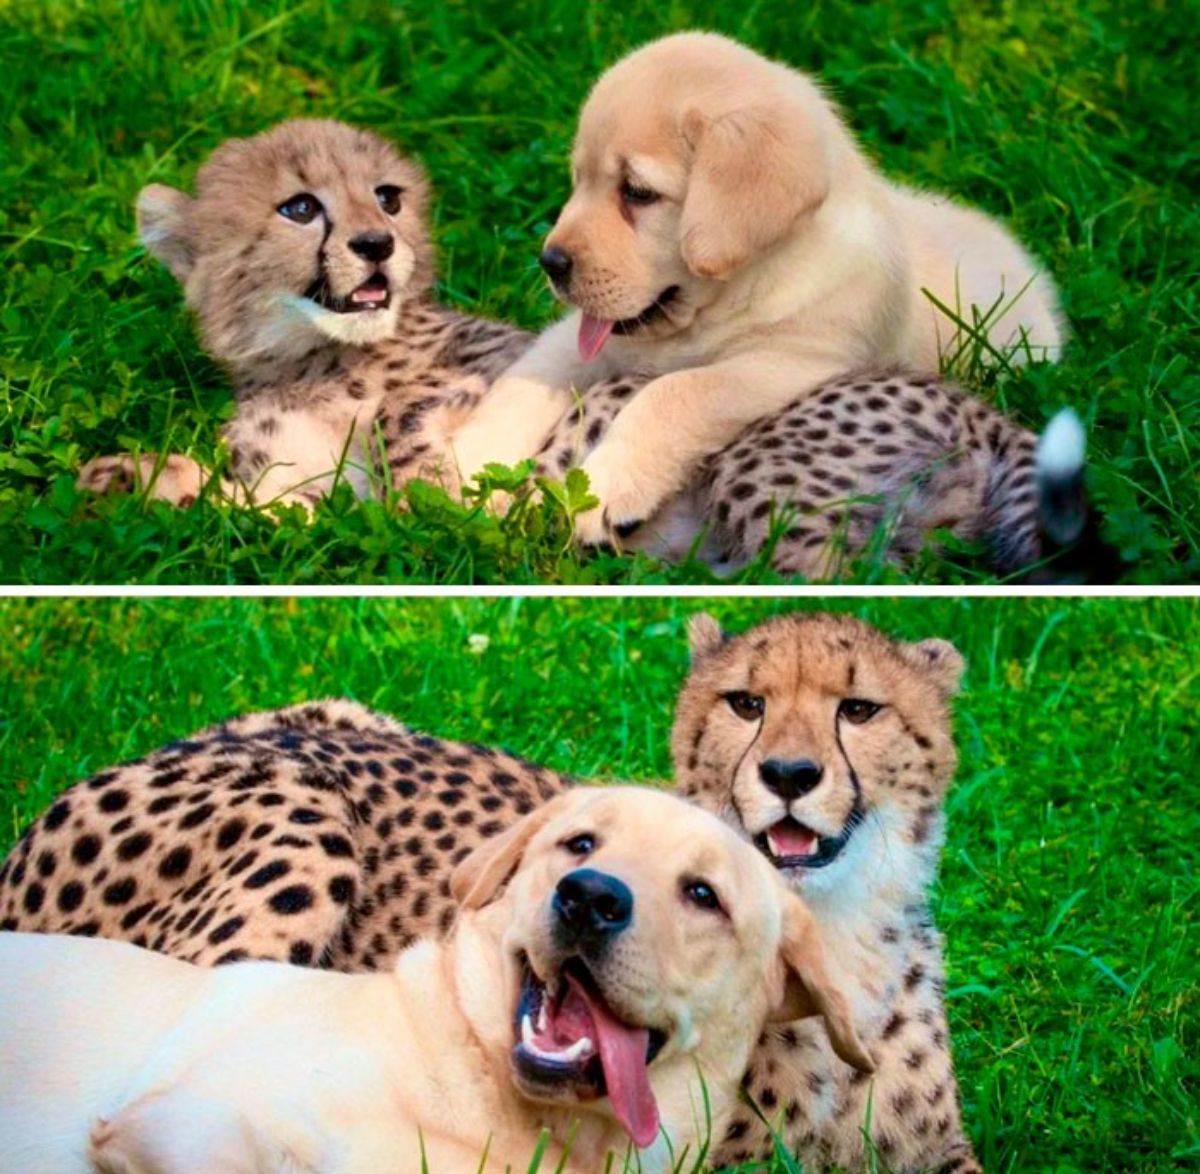 2 photos of a golden retriever and cheetah together as babies and as adults